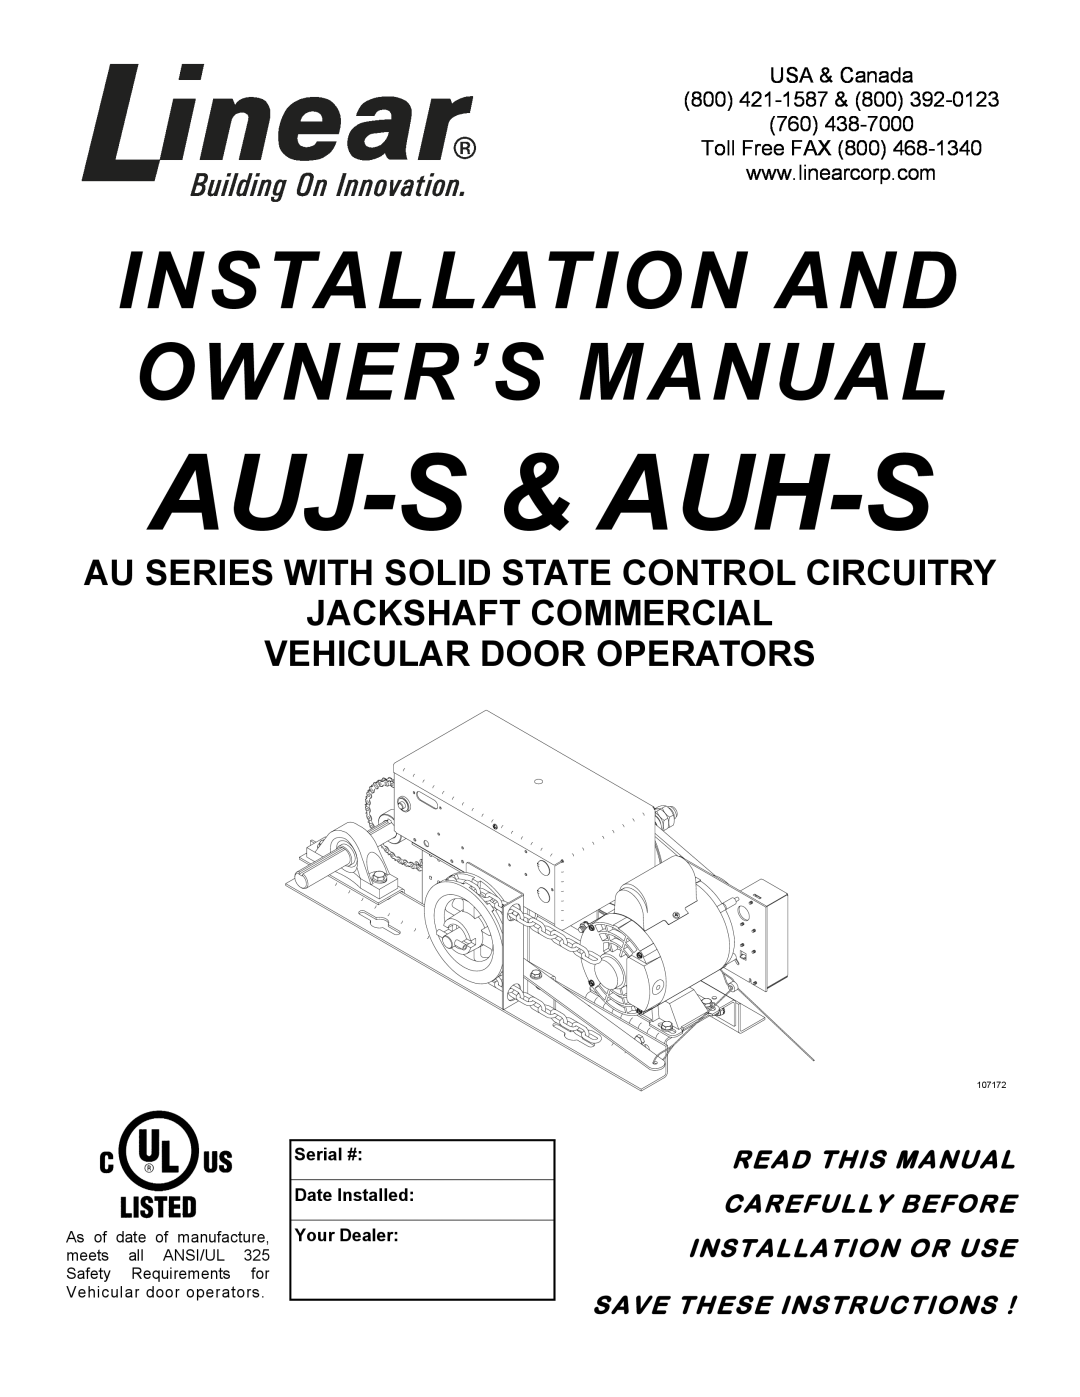 Linear AUH-S owner manual Au Series With Solid State Control Circuitry Jackshaft Commercial, Vehicular Door Operators 